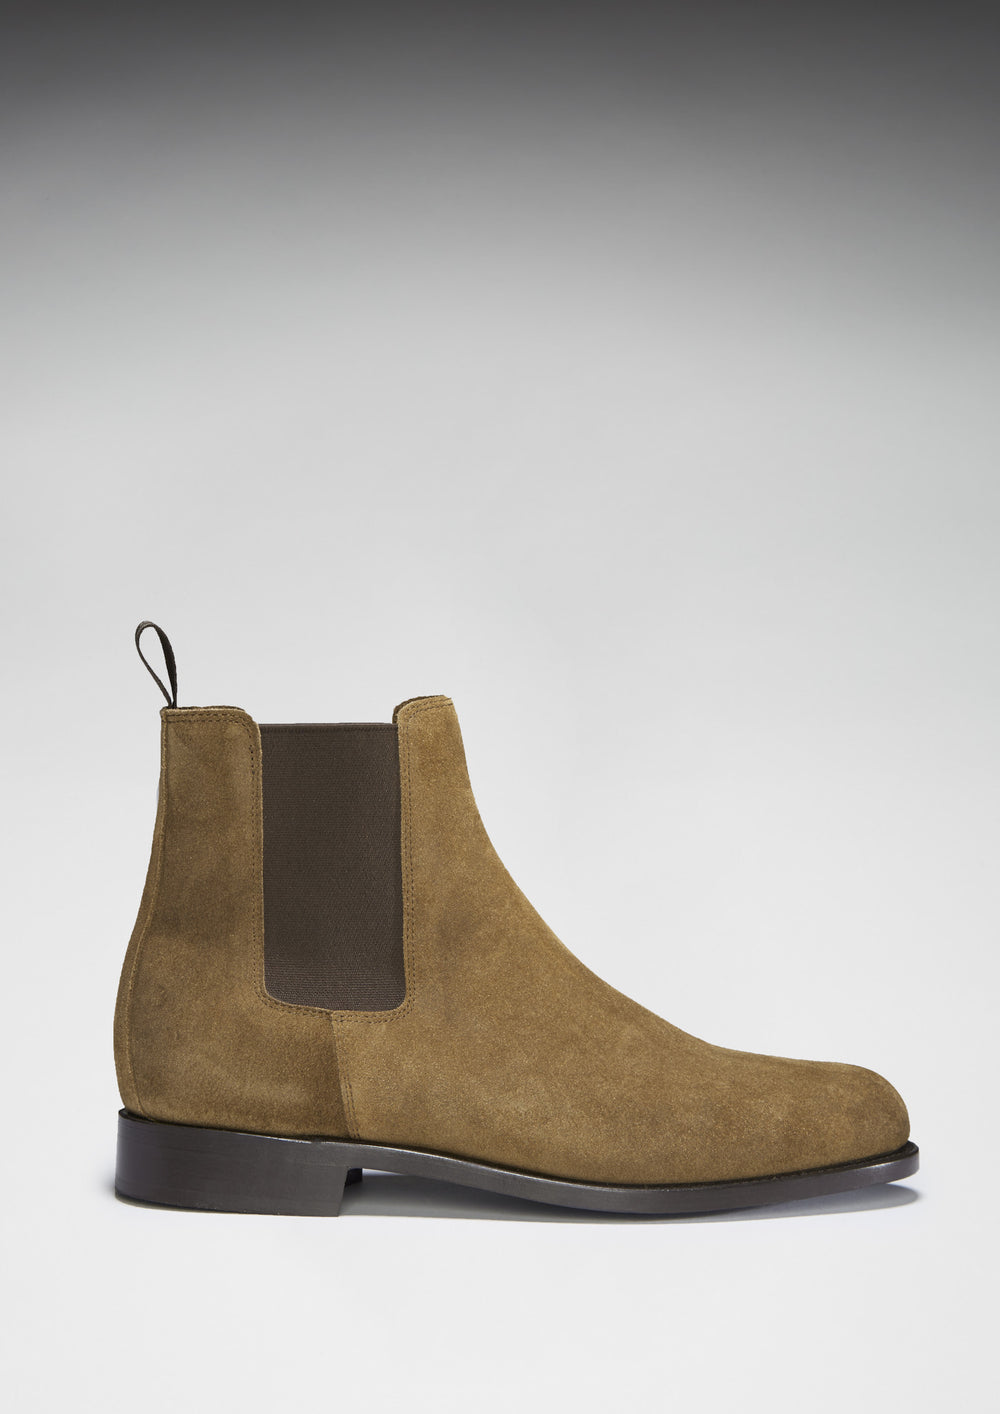 Tobacco Suede Chelsea Boots, Welted Leather Sole - Hugs & Co.